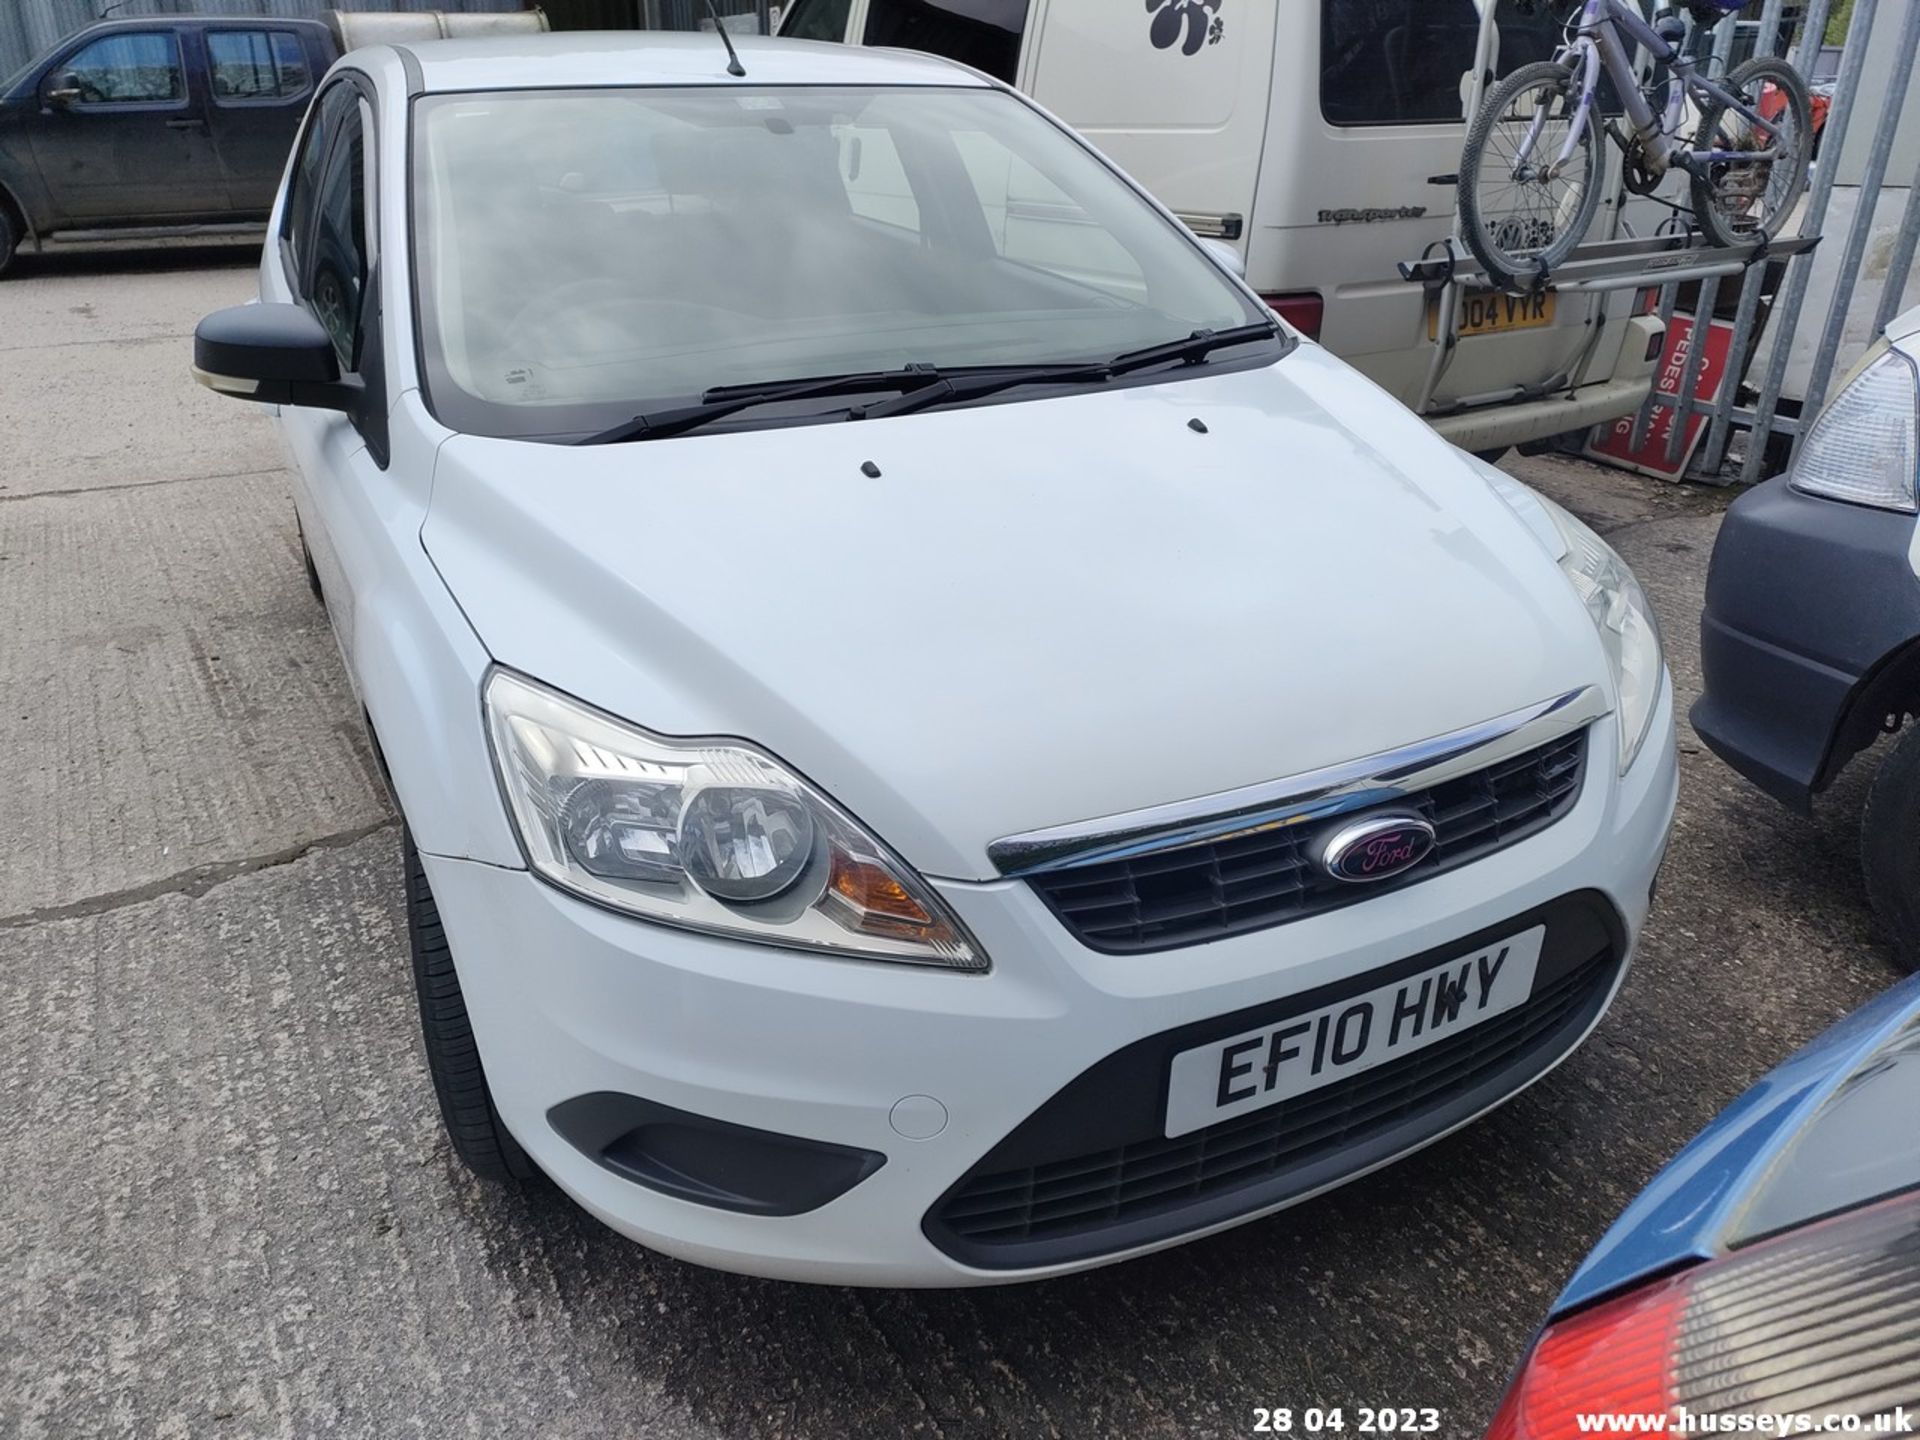 10/10 FORD FOCUS STYLE TDCI - 1560cc 5dr Hatchback (White) - Image 5 of 31